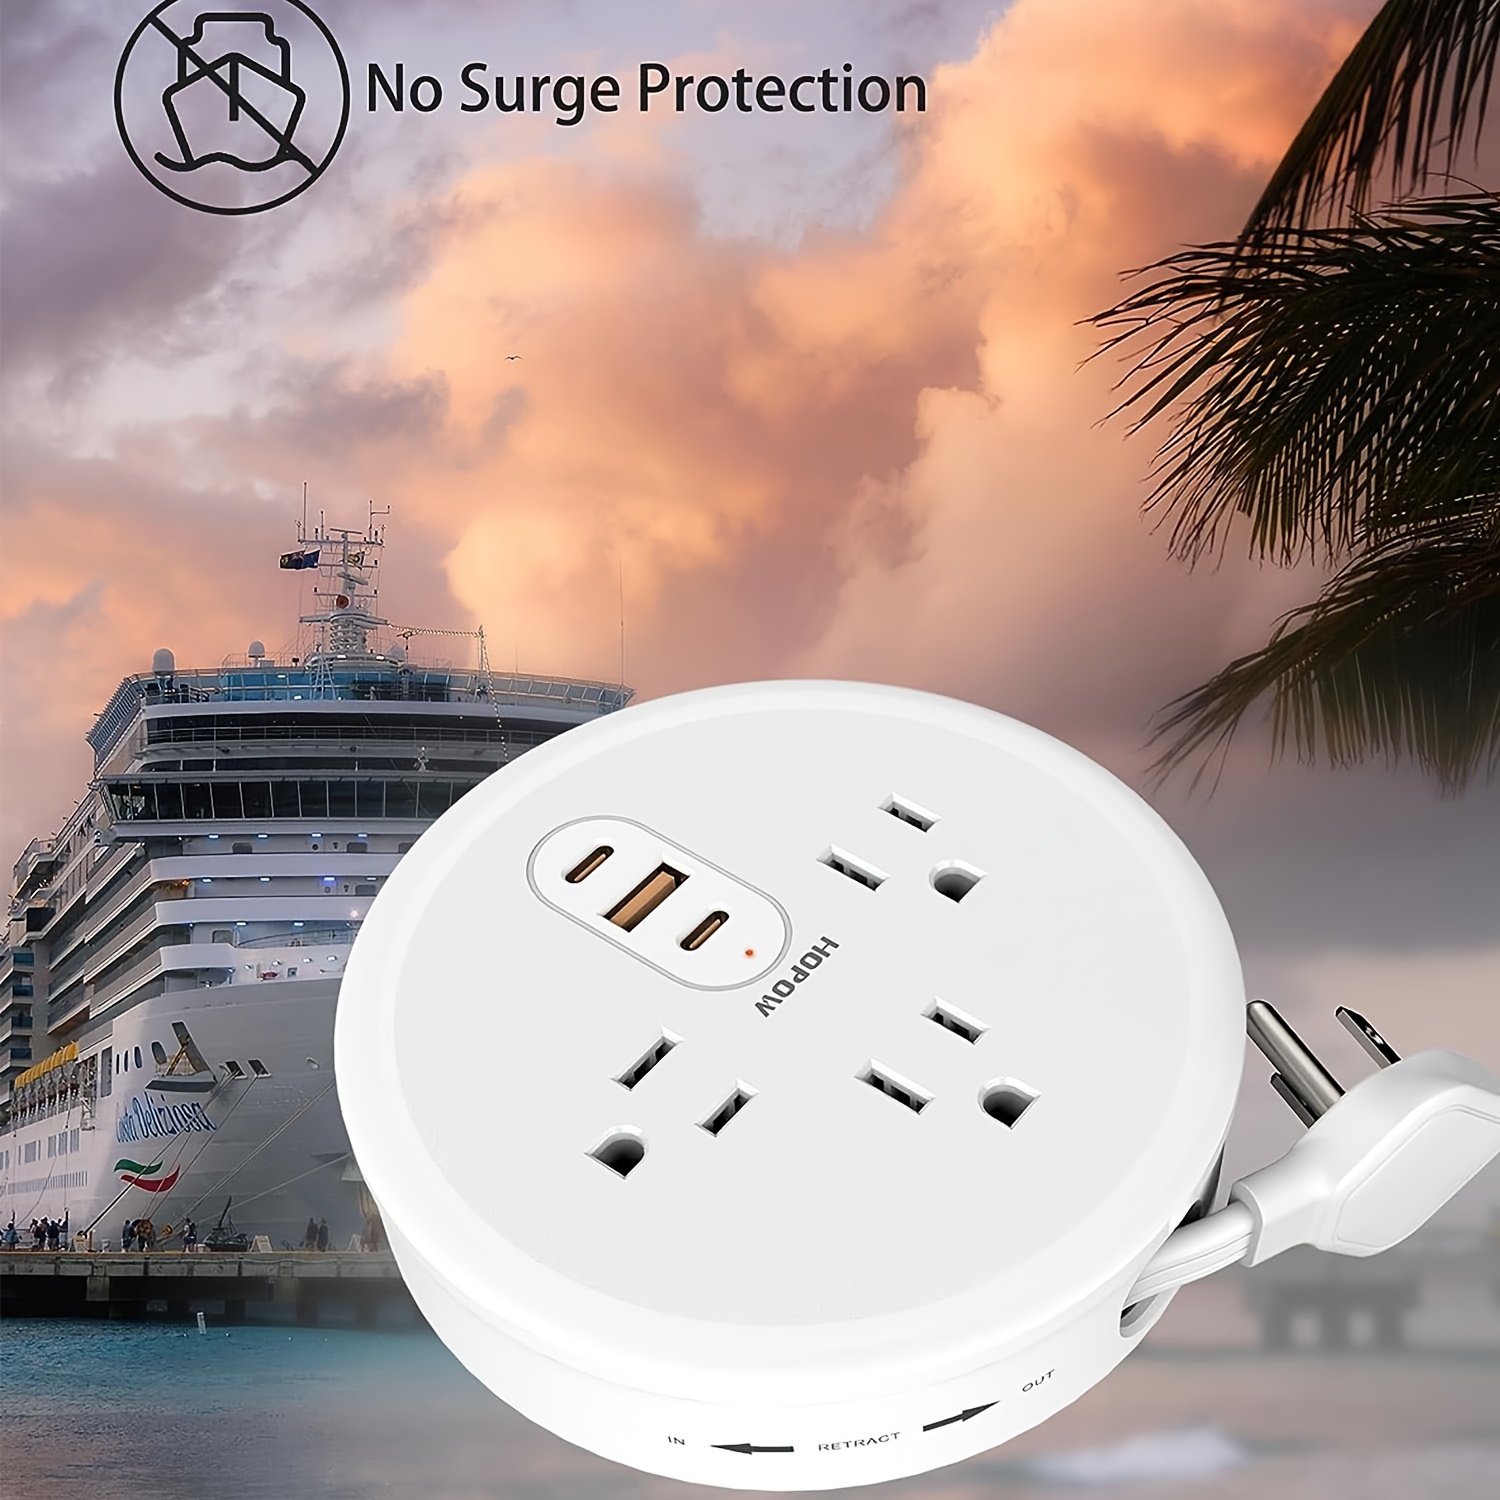 

1pc Retractable Travel Power Strip, Ultra Flat Extension Cord, Flat Plug Power Strip, 3 Outlets With 1 Usb Port(2 Usb C), 4 Ft Extension Cord For Cruise Ship, Travel Essentials